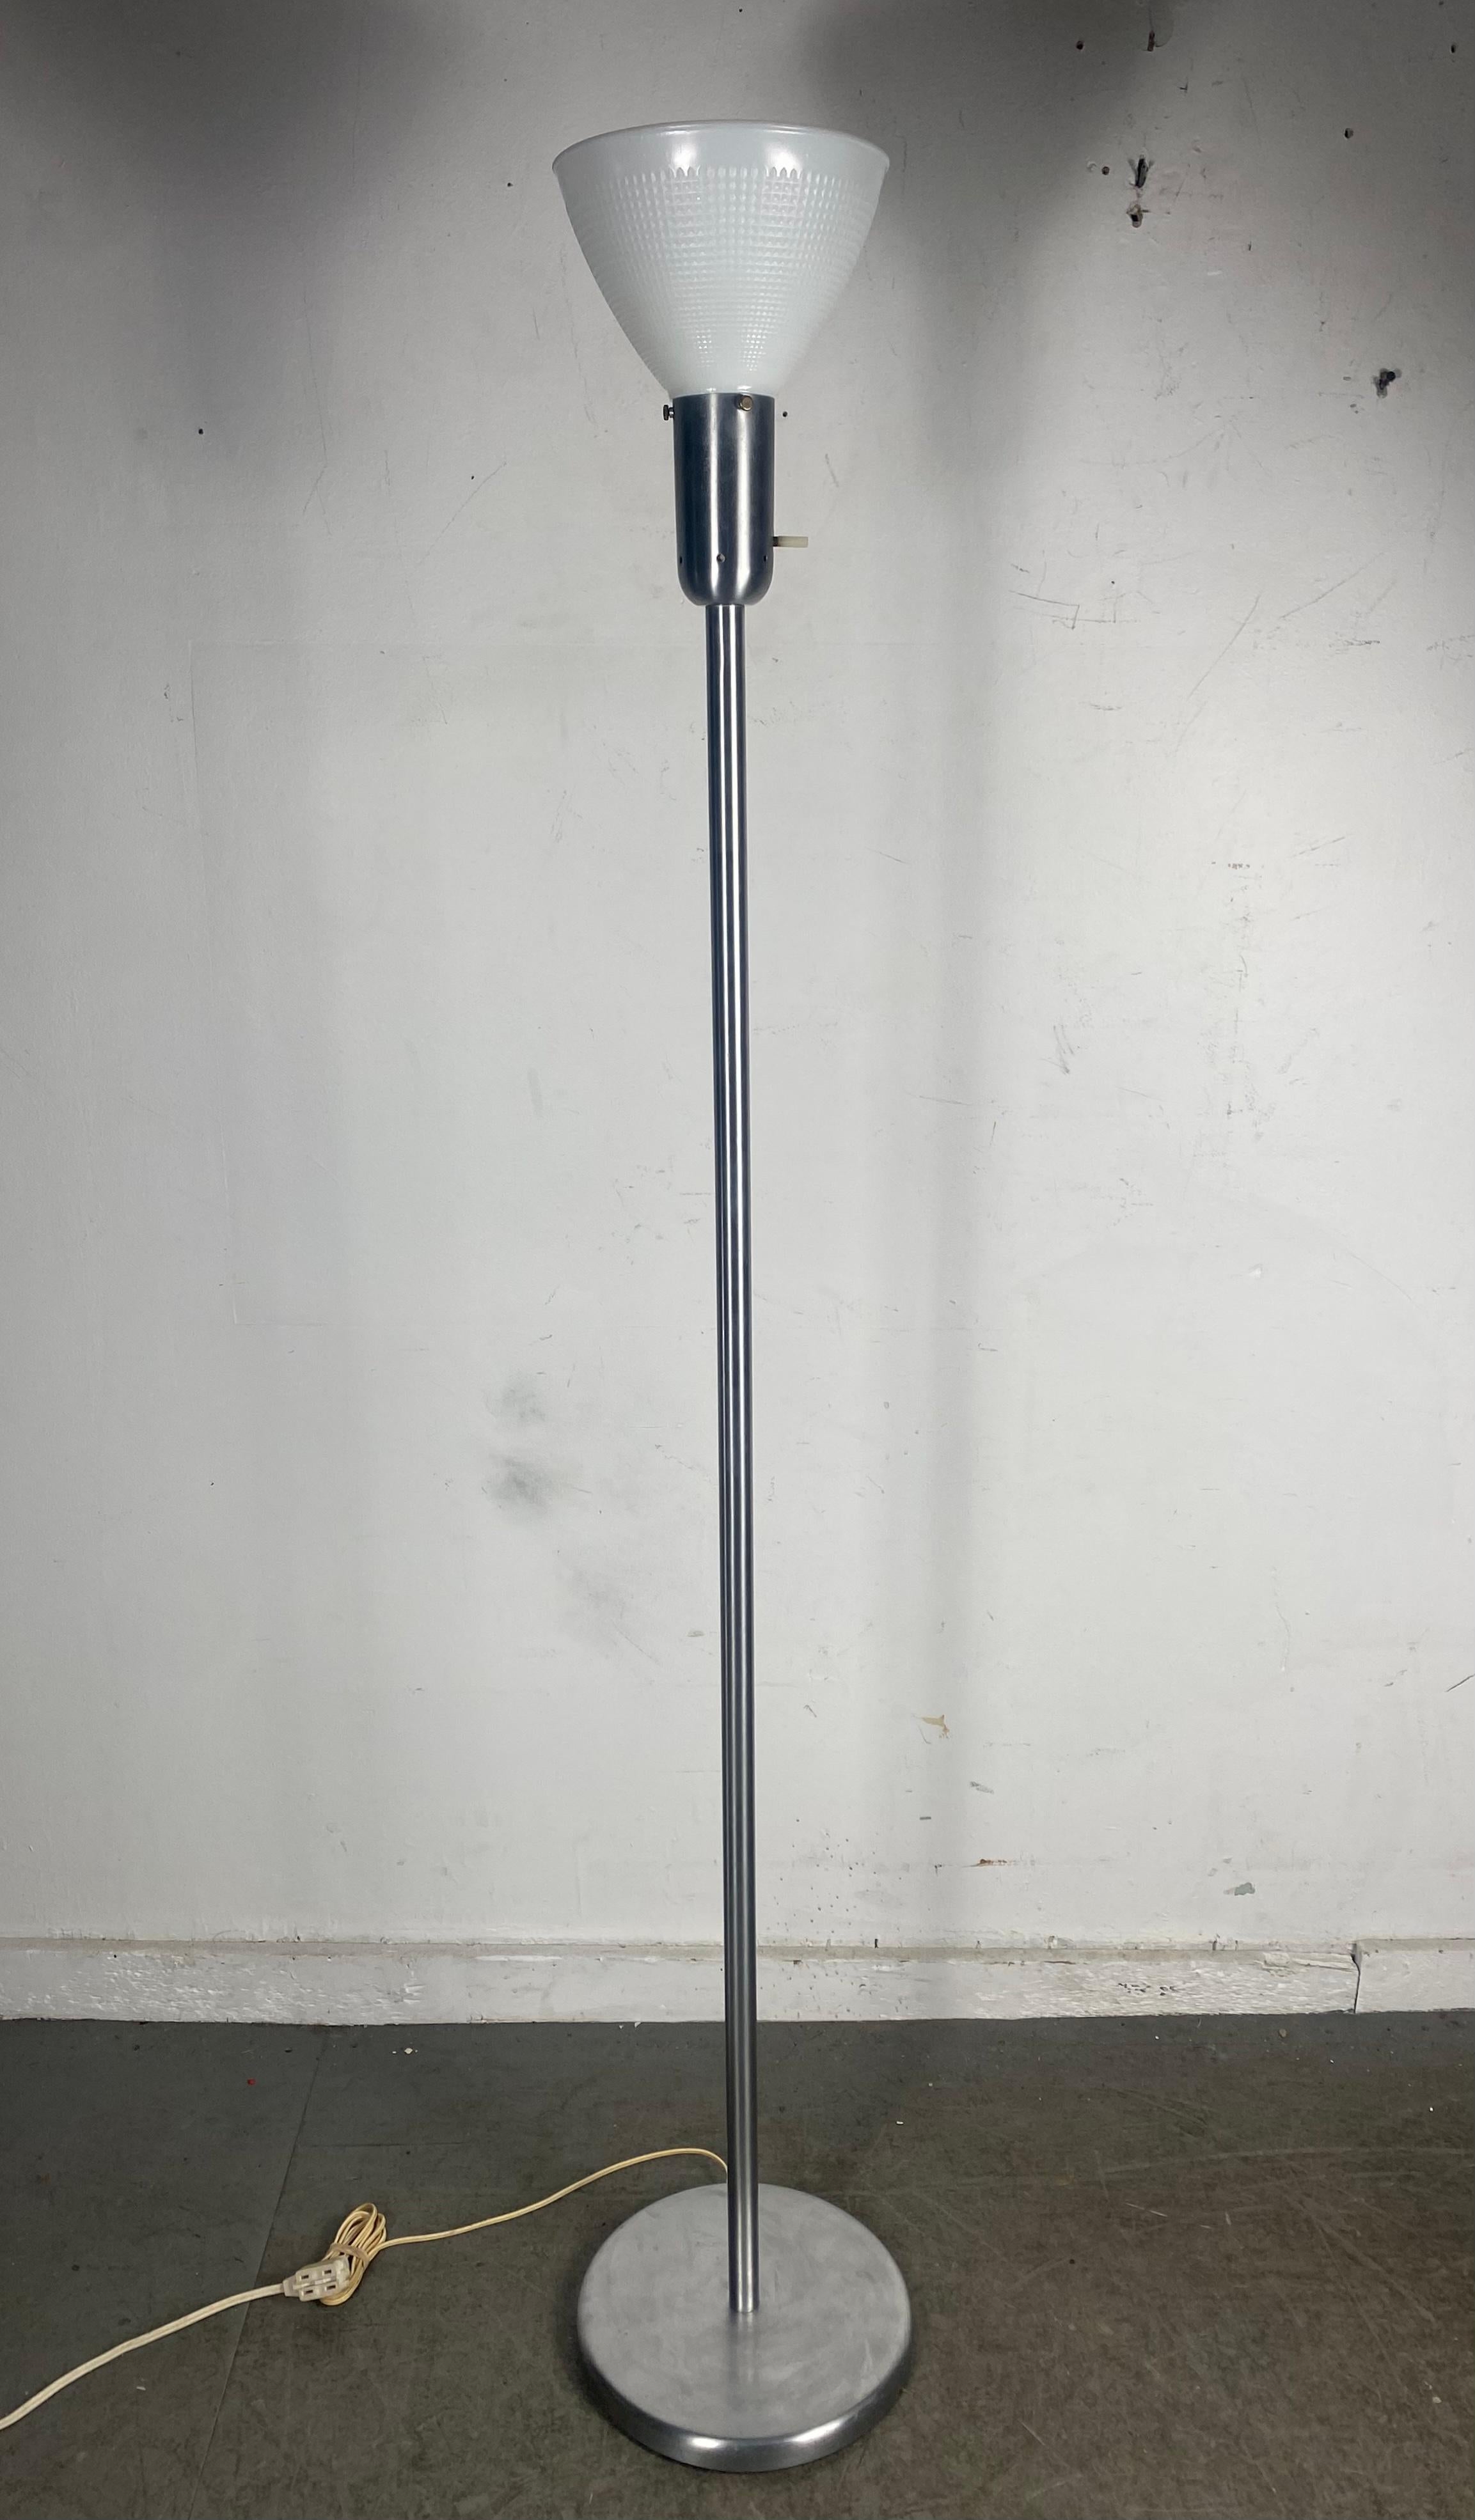 Classic Modernist floor lamp. Simple elegant design from Nessen Studios.Ny. Lamp has a brushed nickel finish. Round base. Standard stem// Retains its original ribbed plastic (bakelite) stem. On/off switch. Elegant, modern simplicity that works in